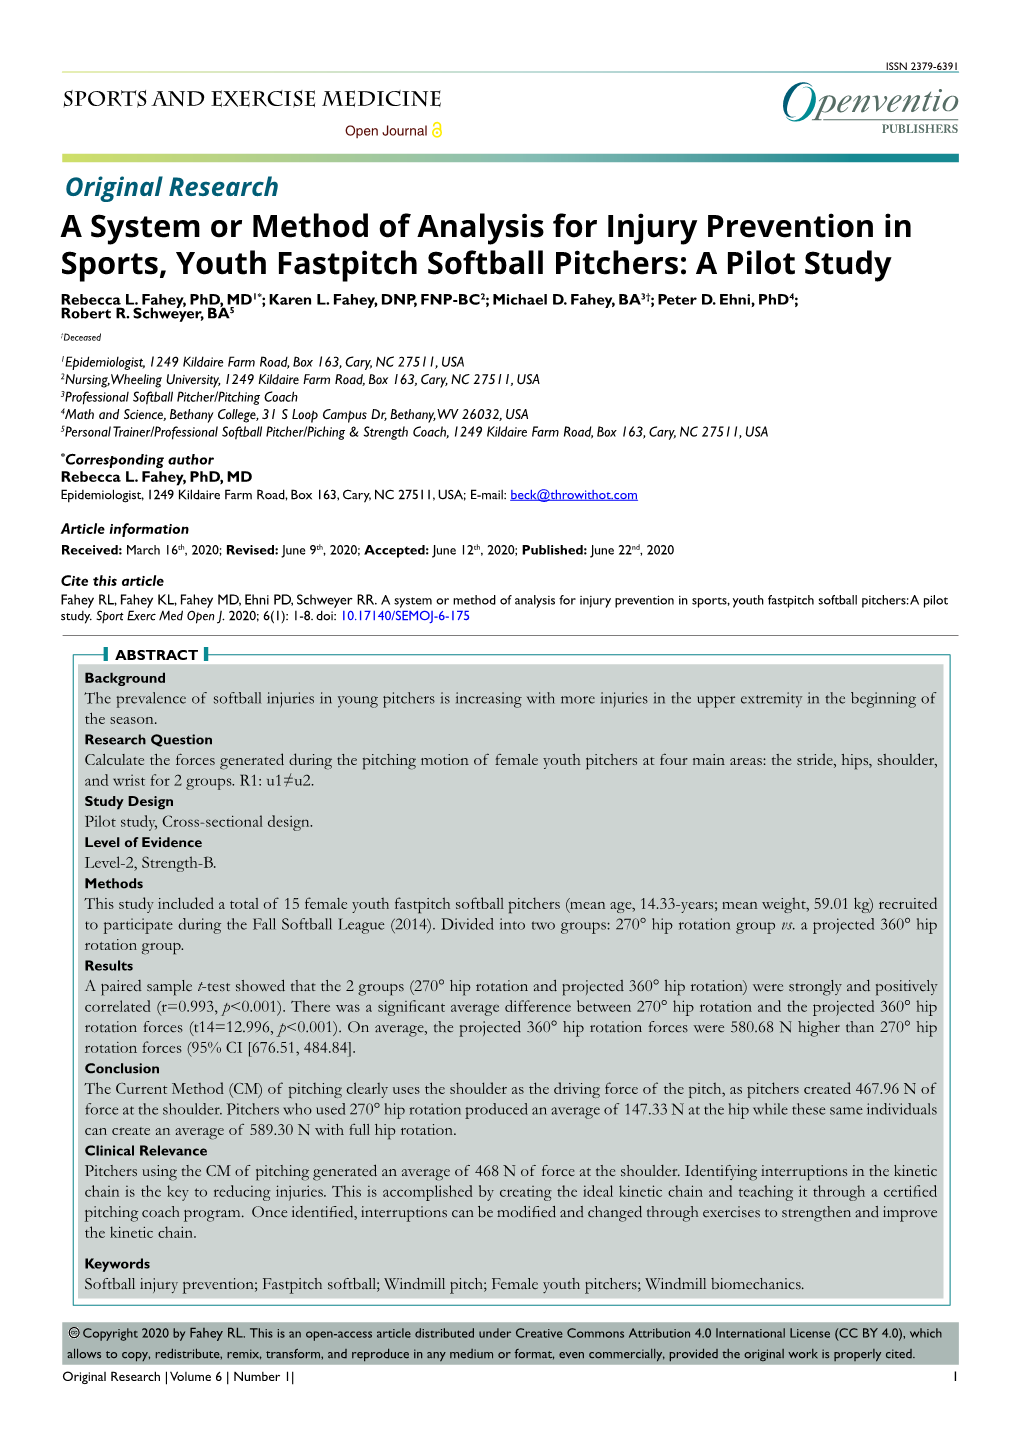 A System Or Method of Analysis for Injury Prevention in Sports, Youth Fastpitch Softball Pitchers: a Pilot Study Rebecca L